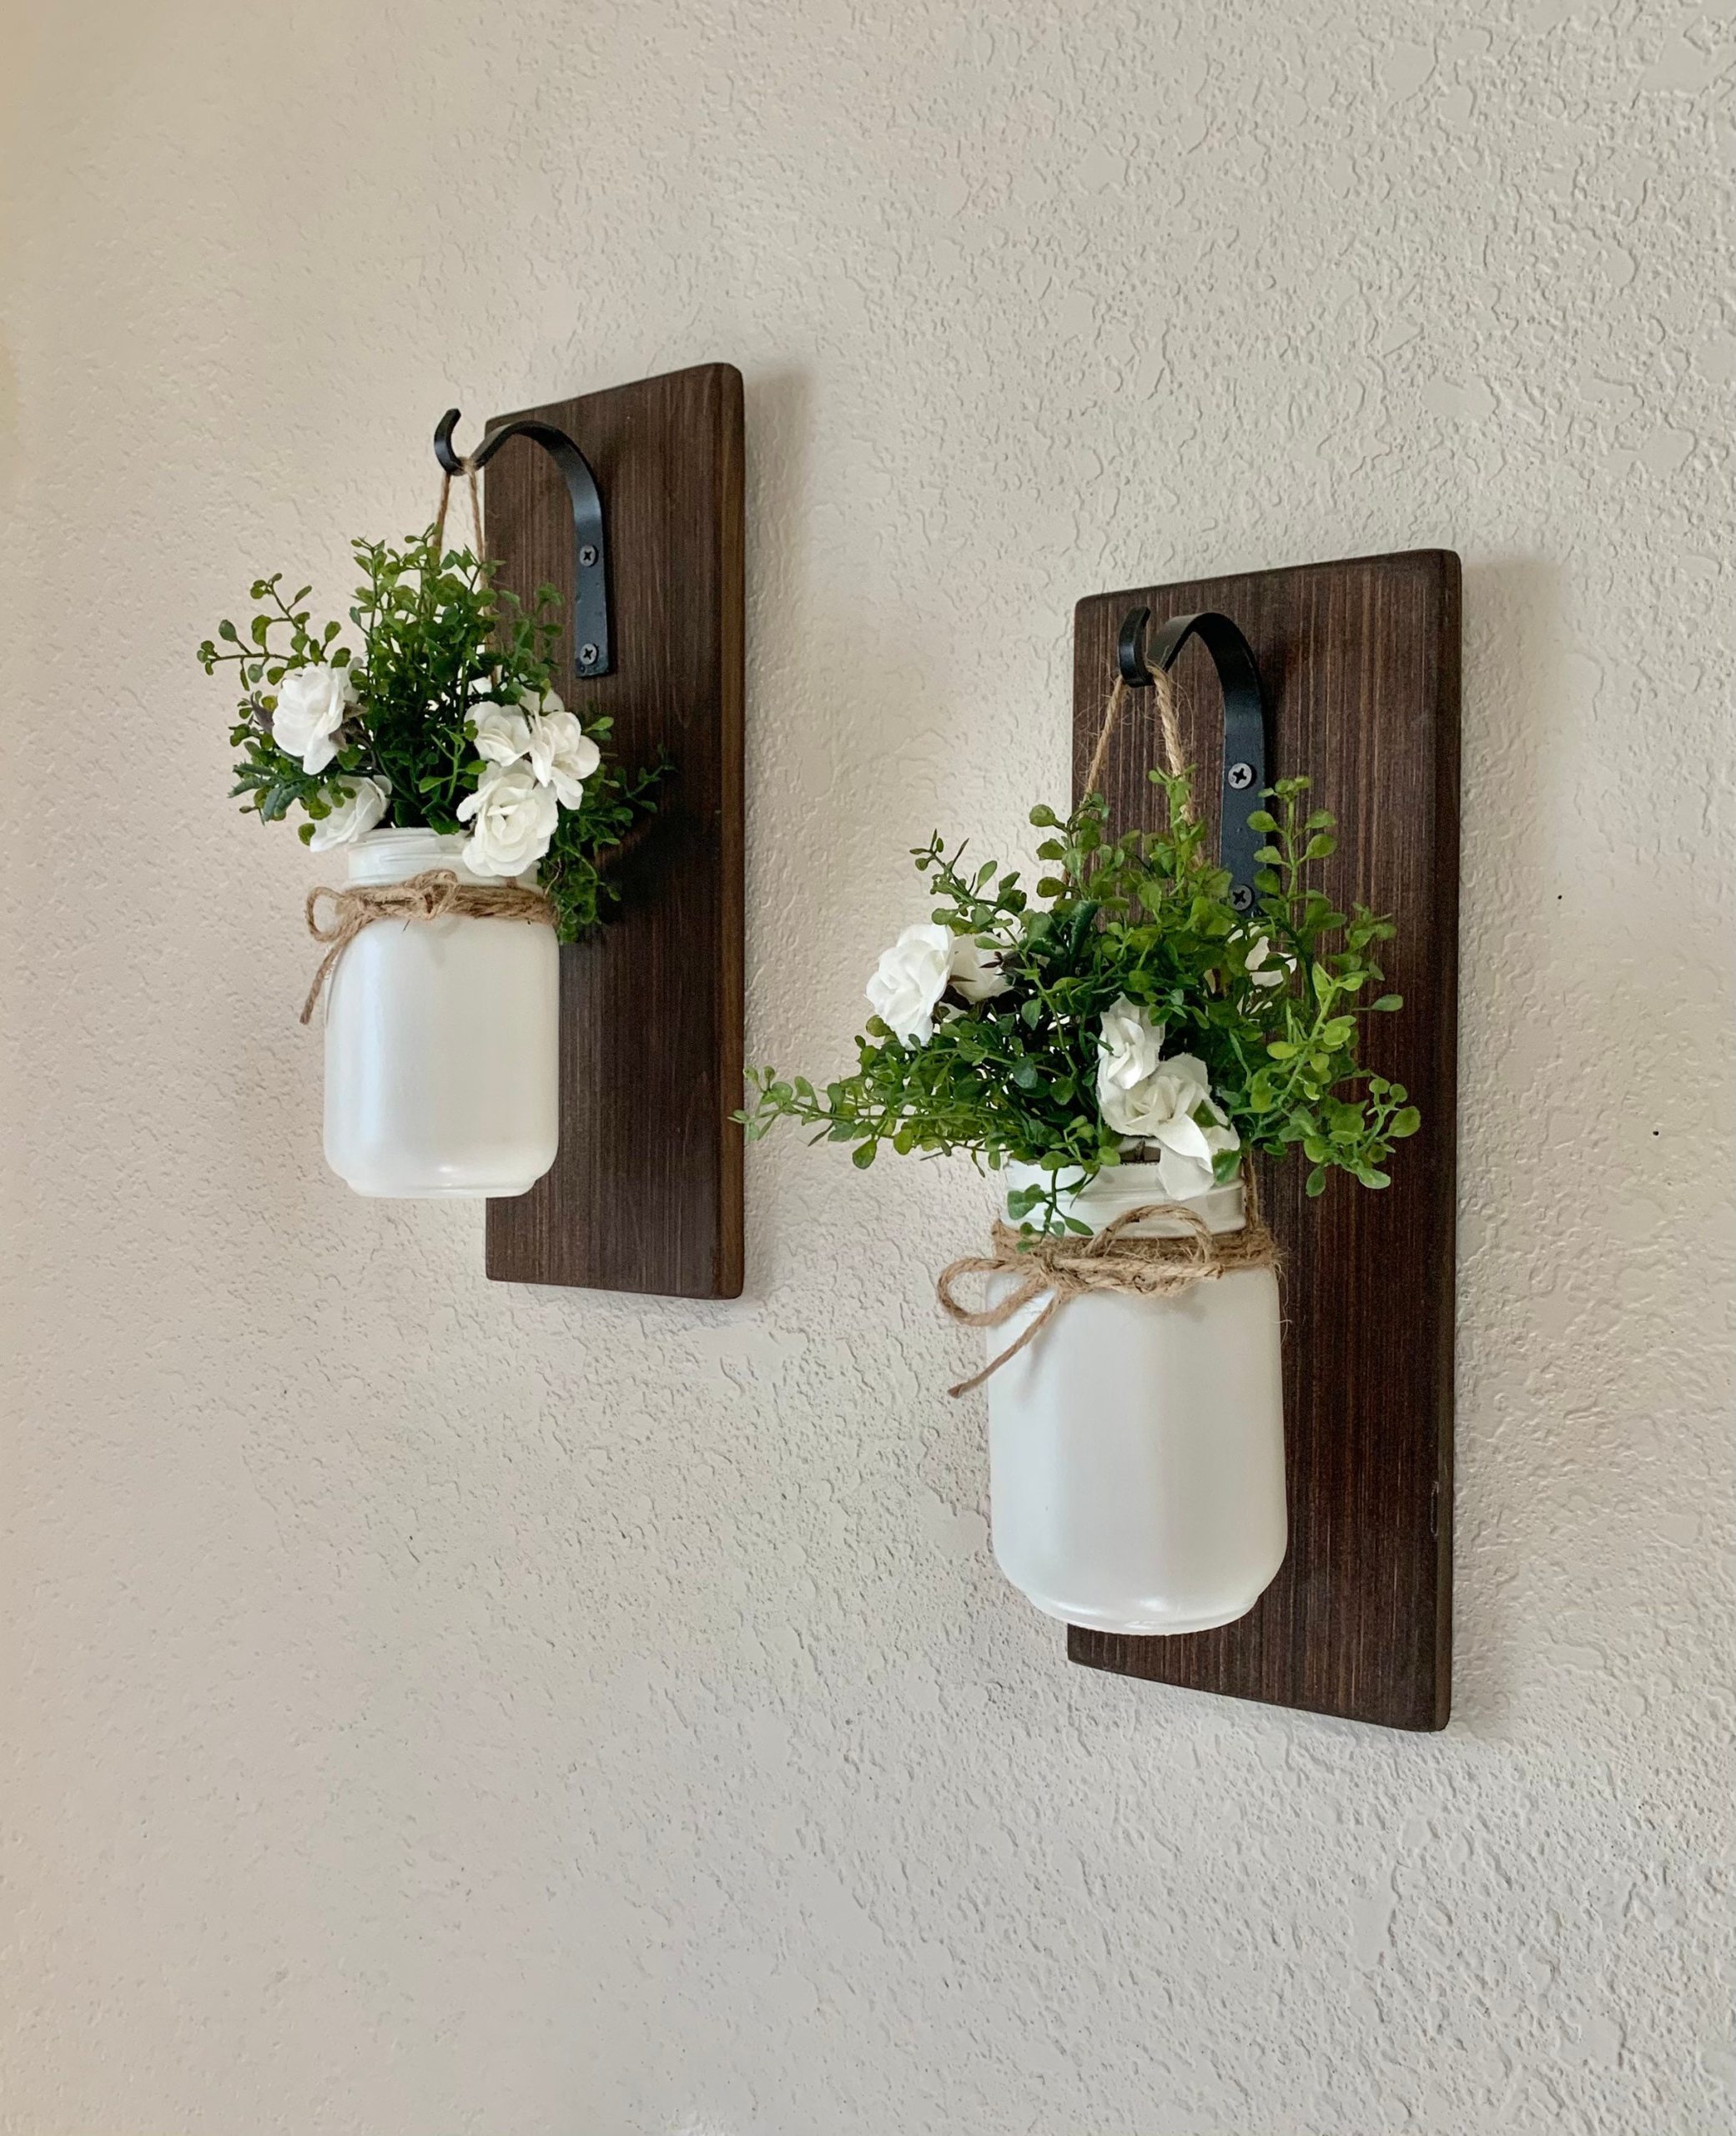 DIY Wall Decorations from Jars